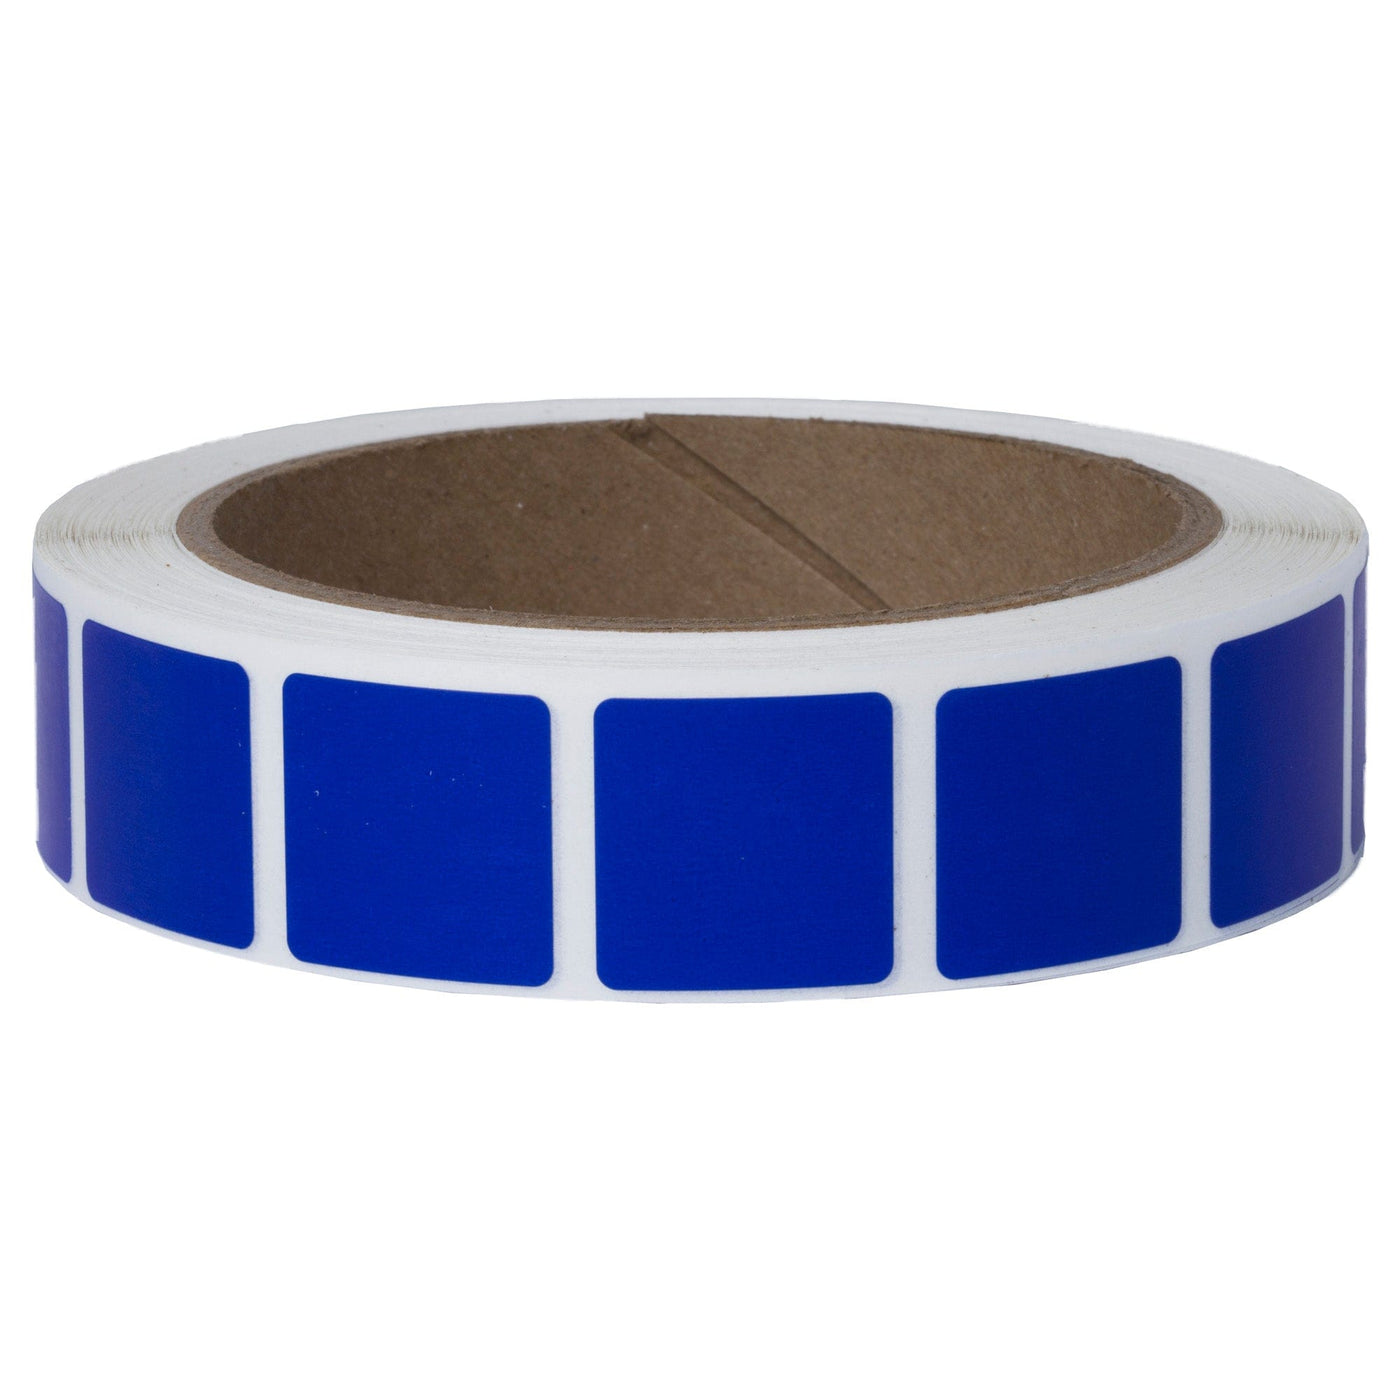 ACTION TARGET INC Action Target Inc Square Target Pasters, Action Past/txbl Pasters Blue 1000 7/8 Sq Per Roll Blue Shooting